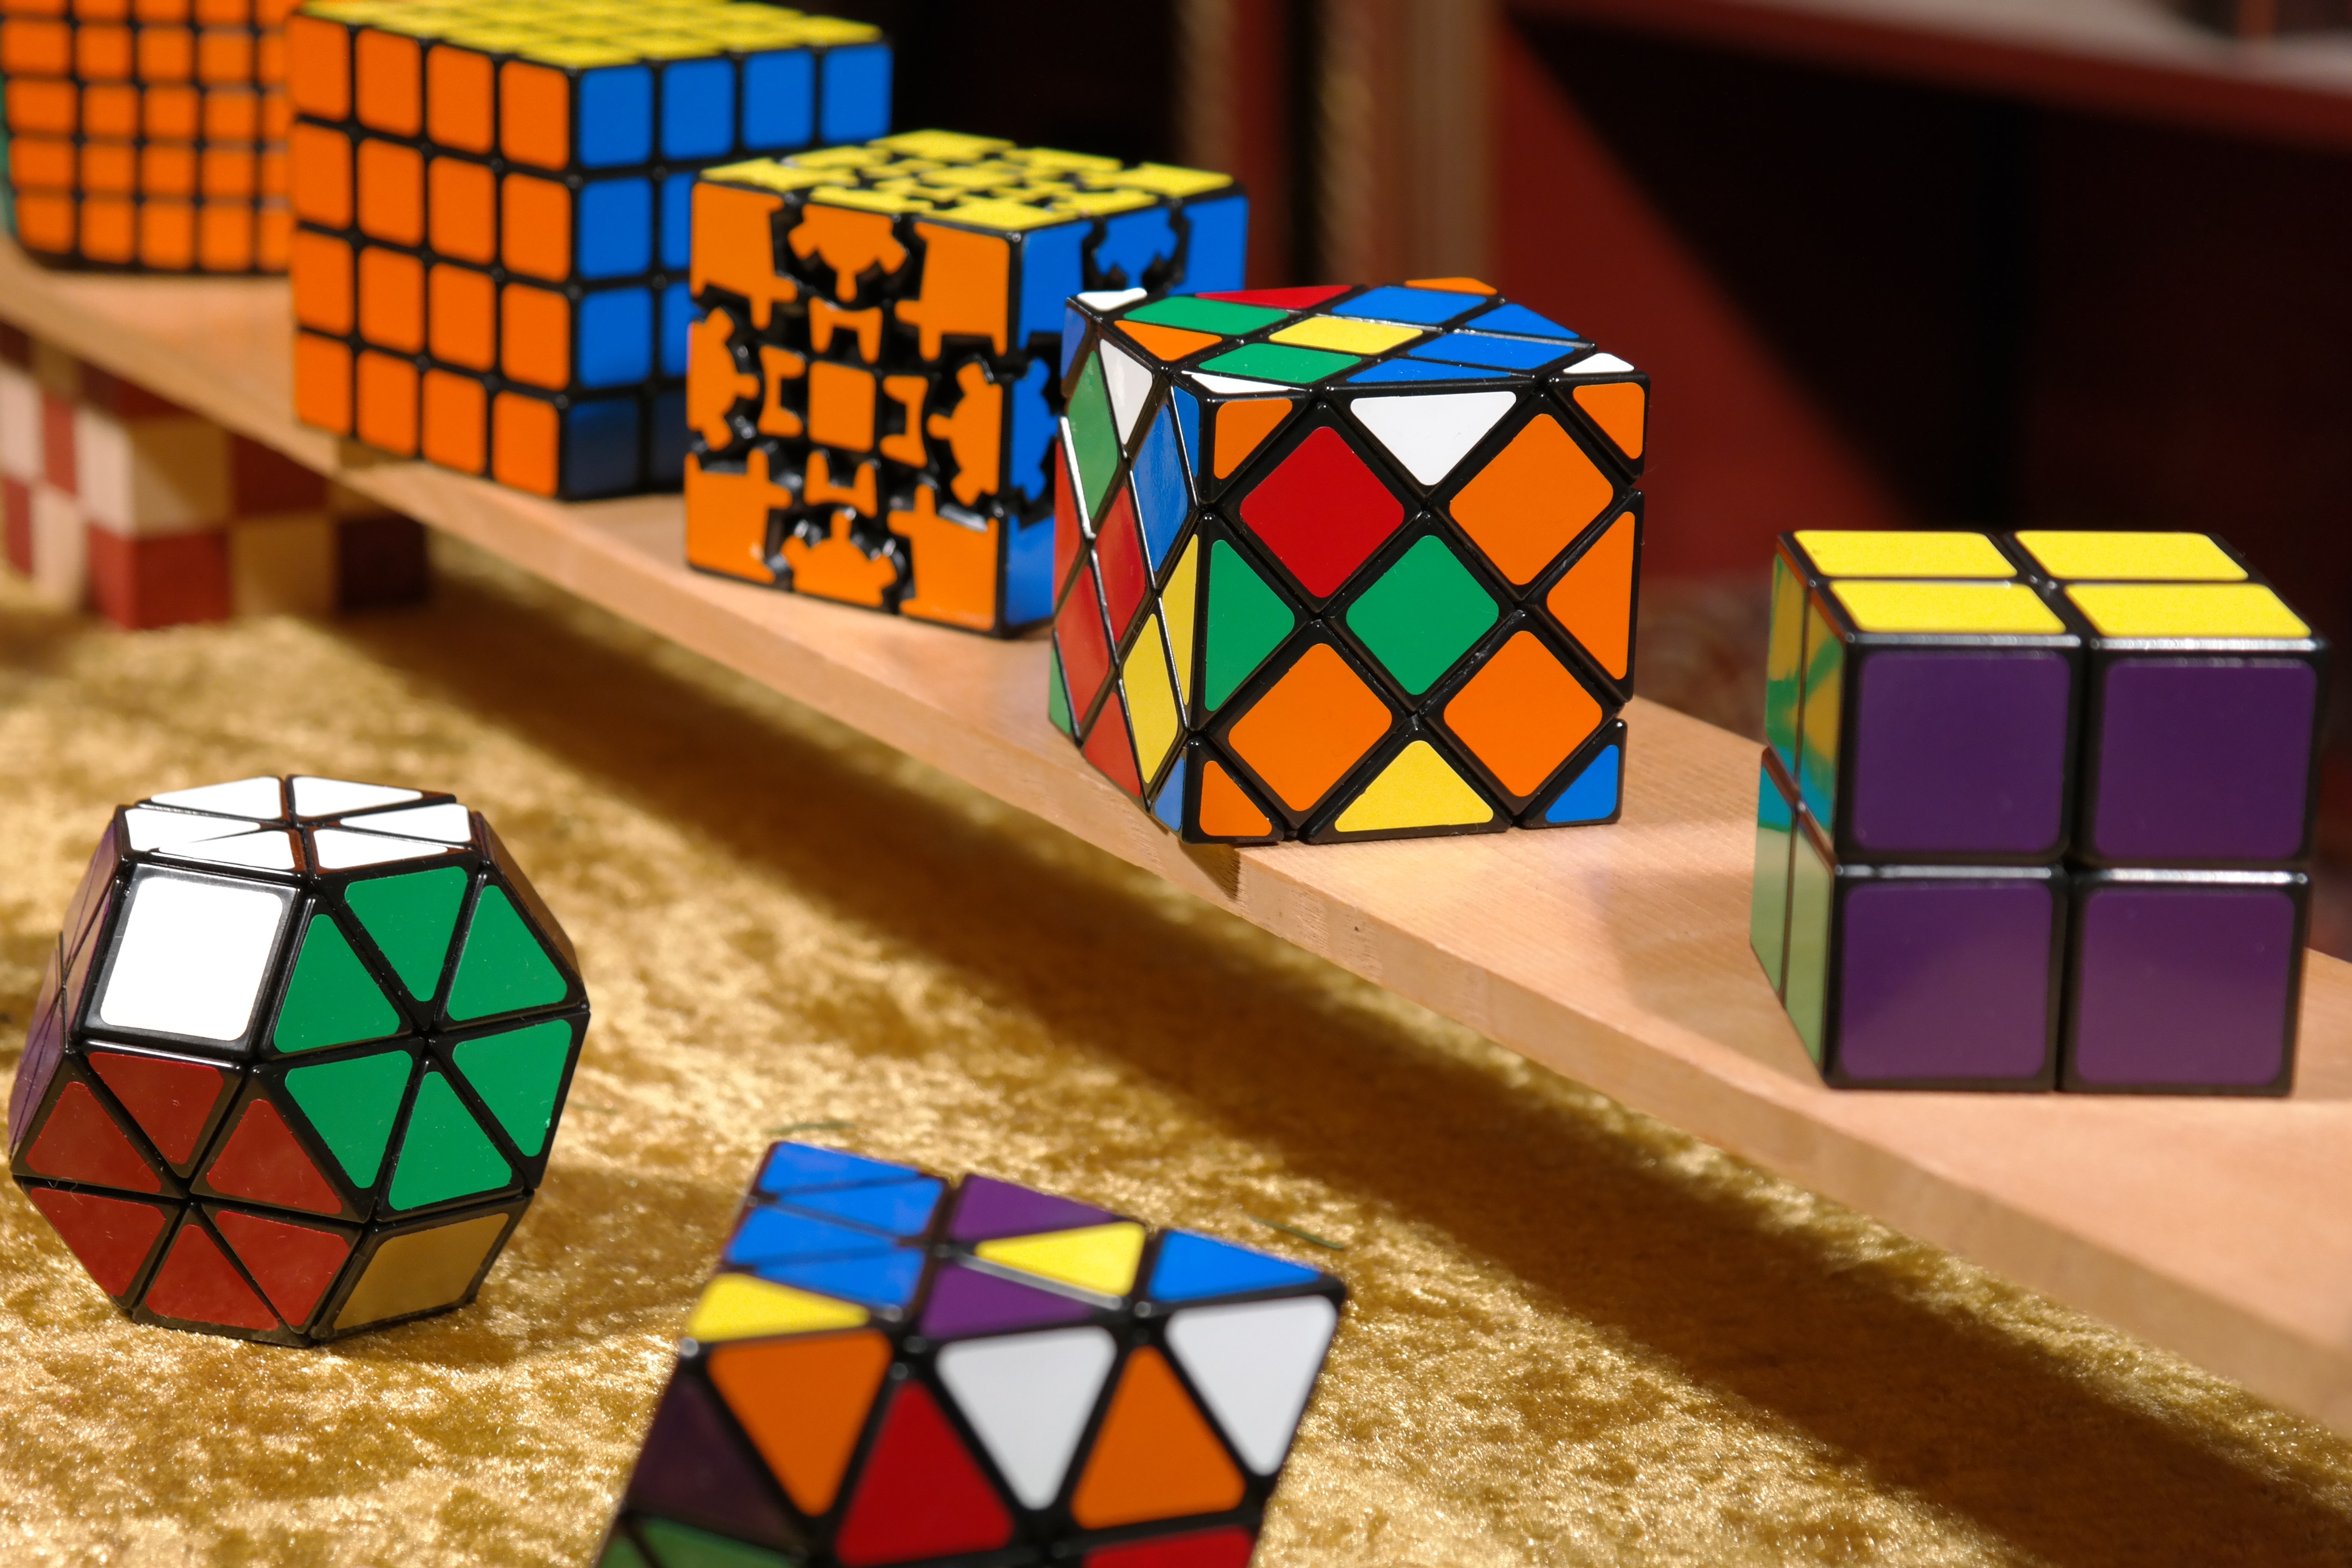 Magic Cube, Puzzle, Patience Games, multi colored, no people